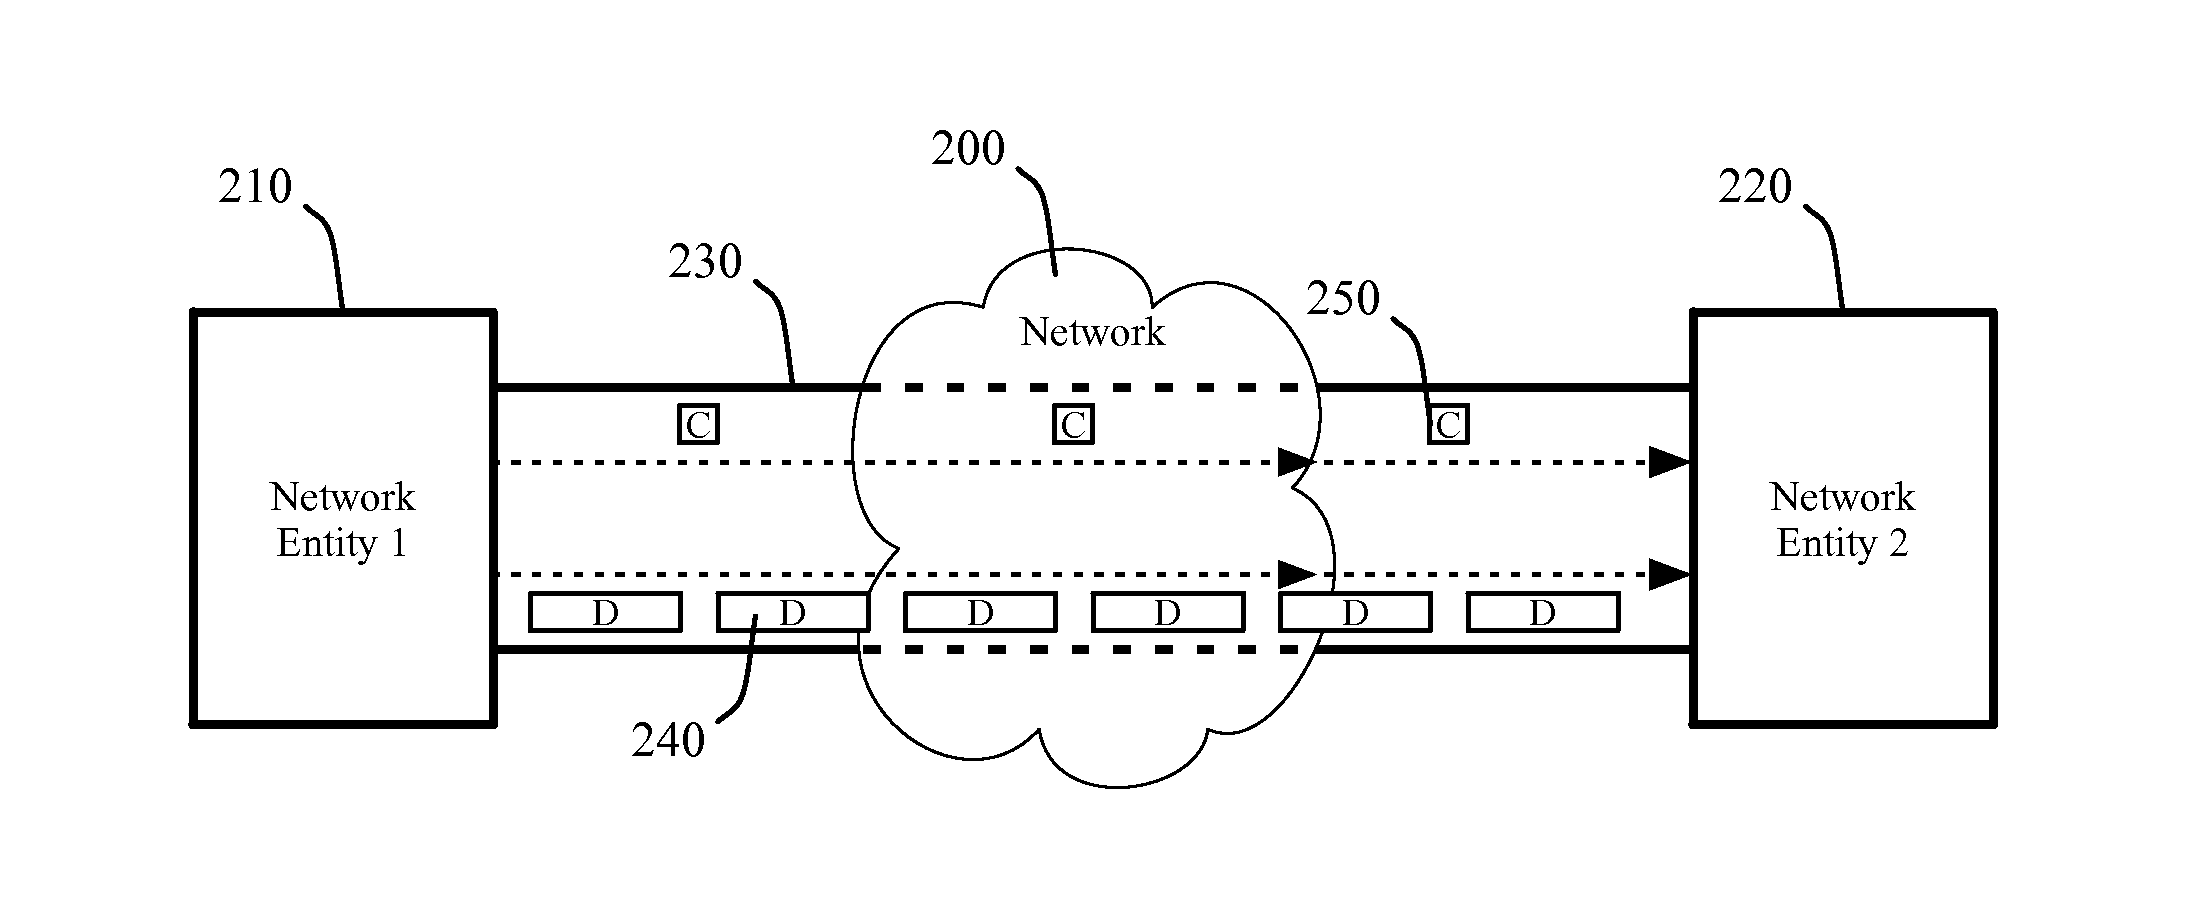 Adjusting connection validating control signals in response to changes in network traffic